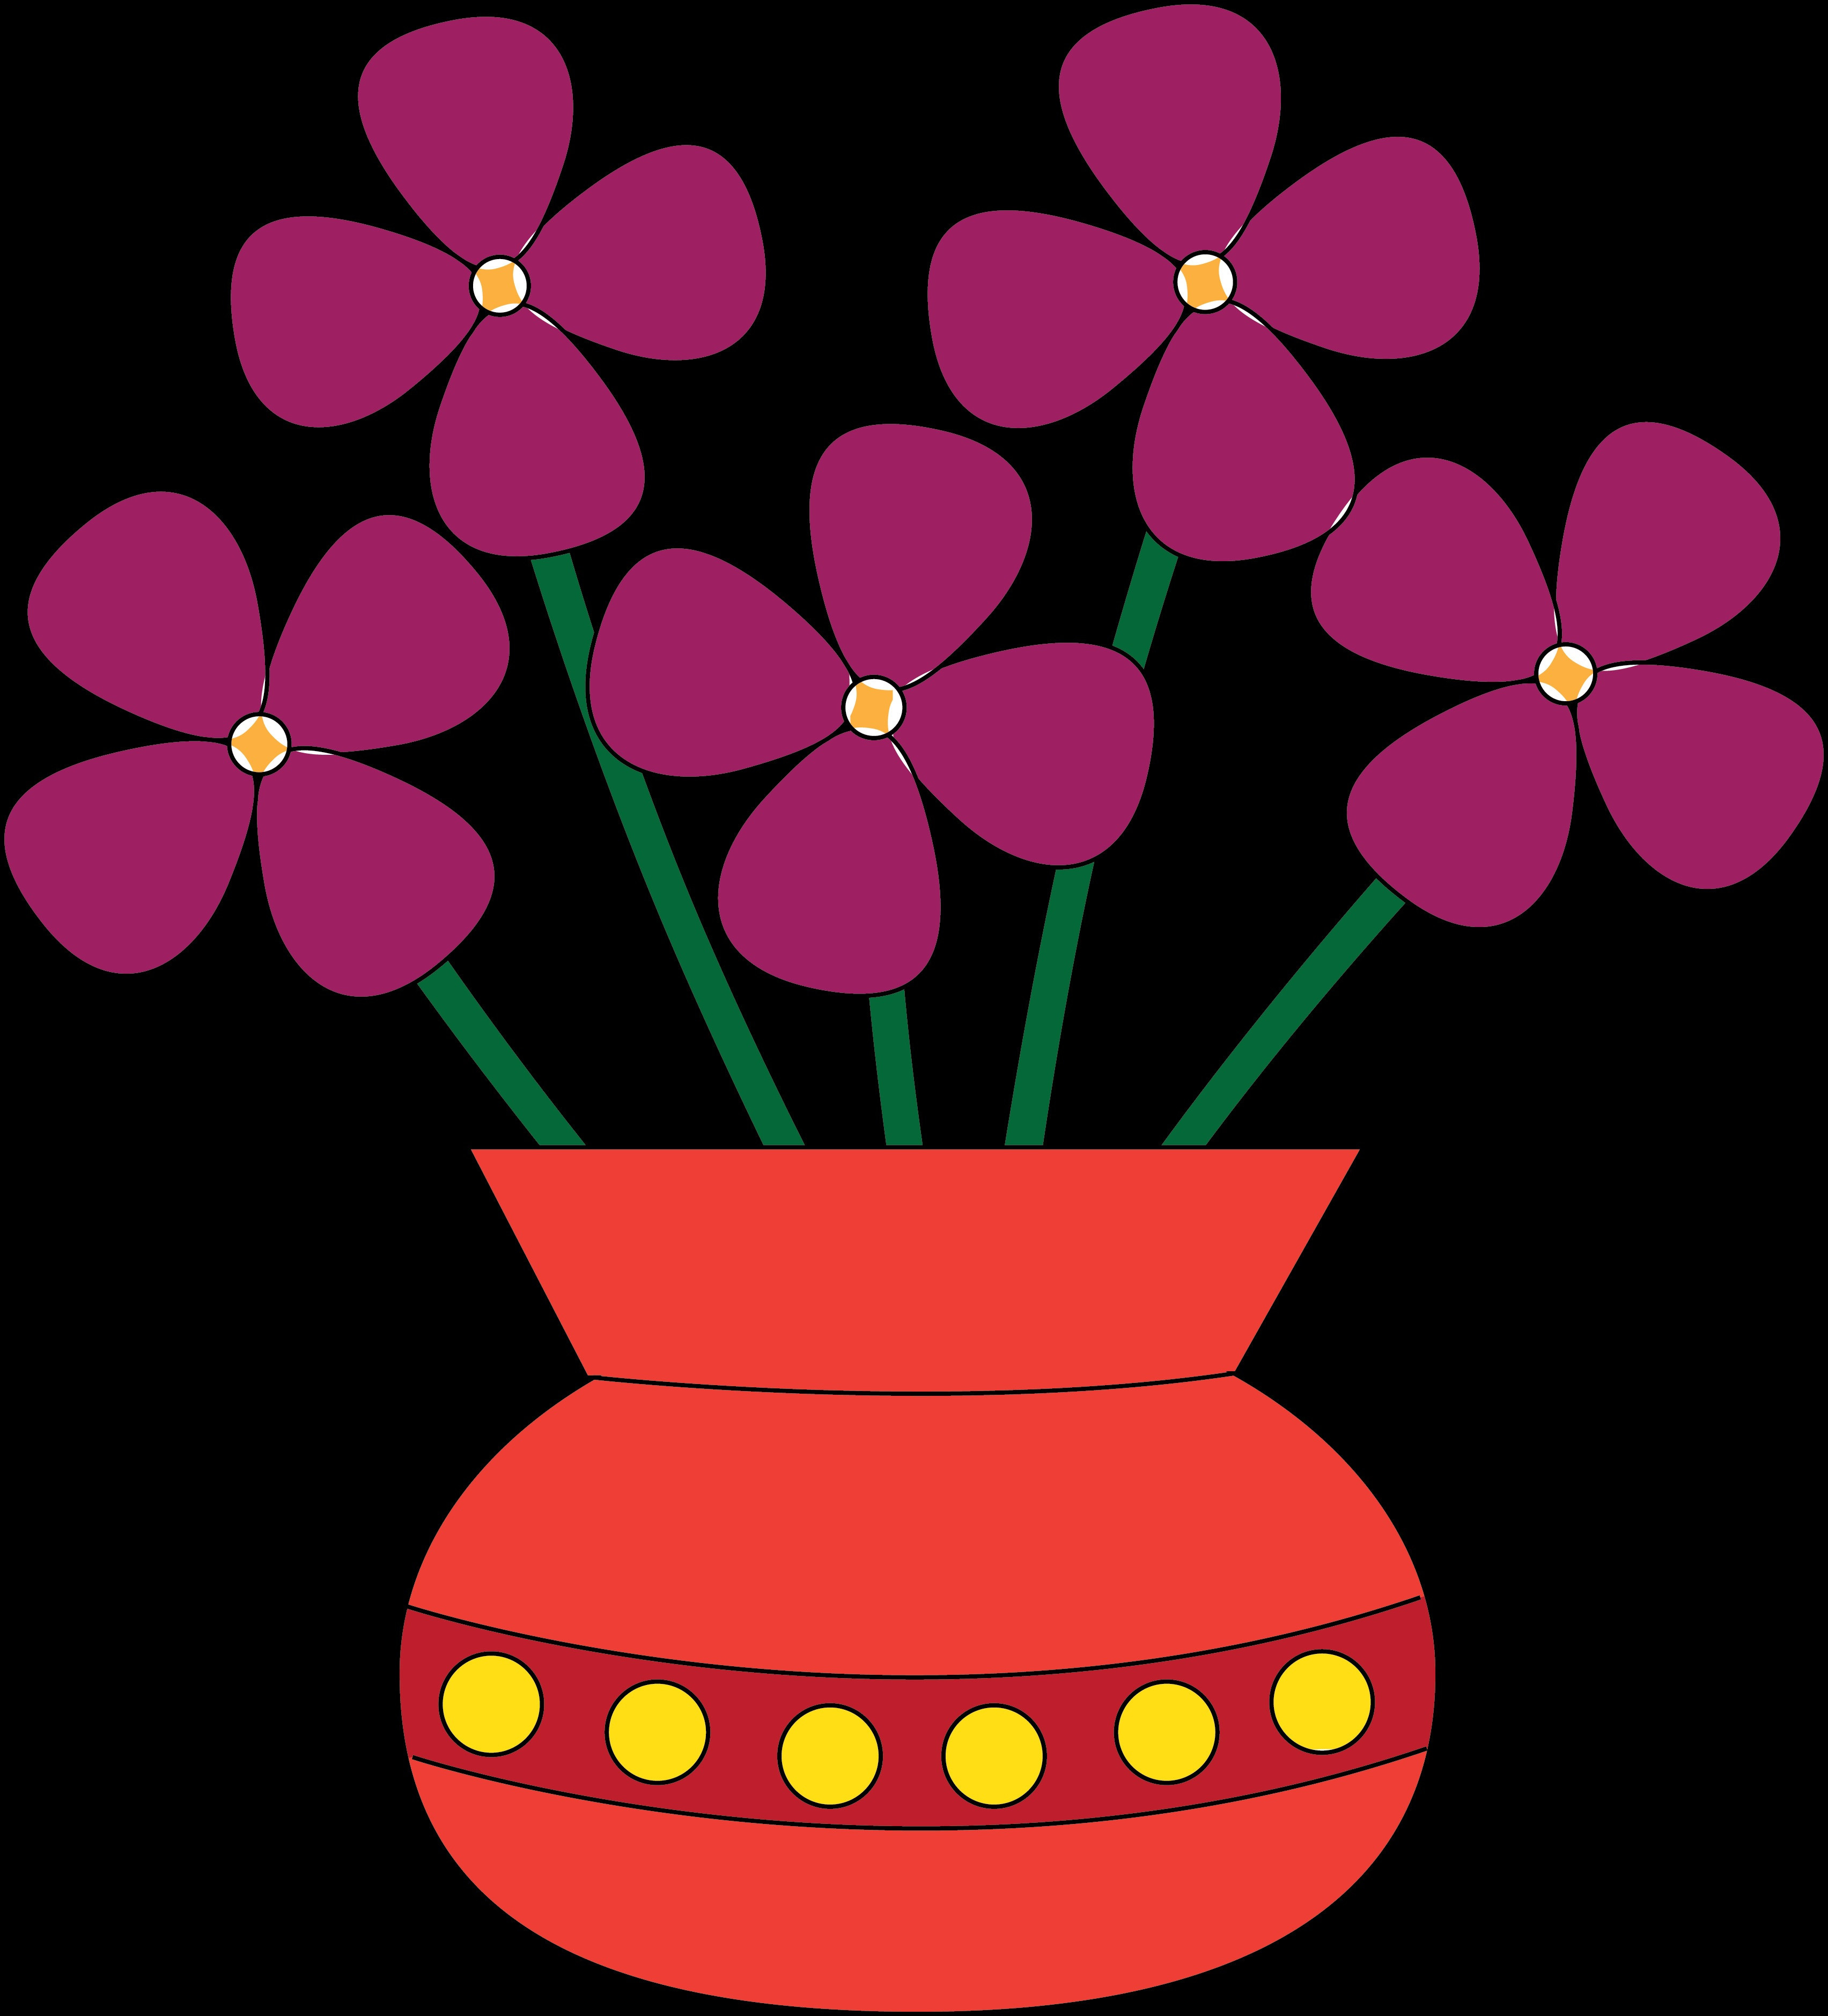 10 Famous Colorful Flower Vase 2024 free download colorful flower vase of flower image clipart update will clipart colored flower vase clip in colored flower vase clip flower image clipart inspiring art clipart red border clipart new red ca